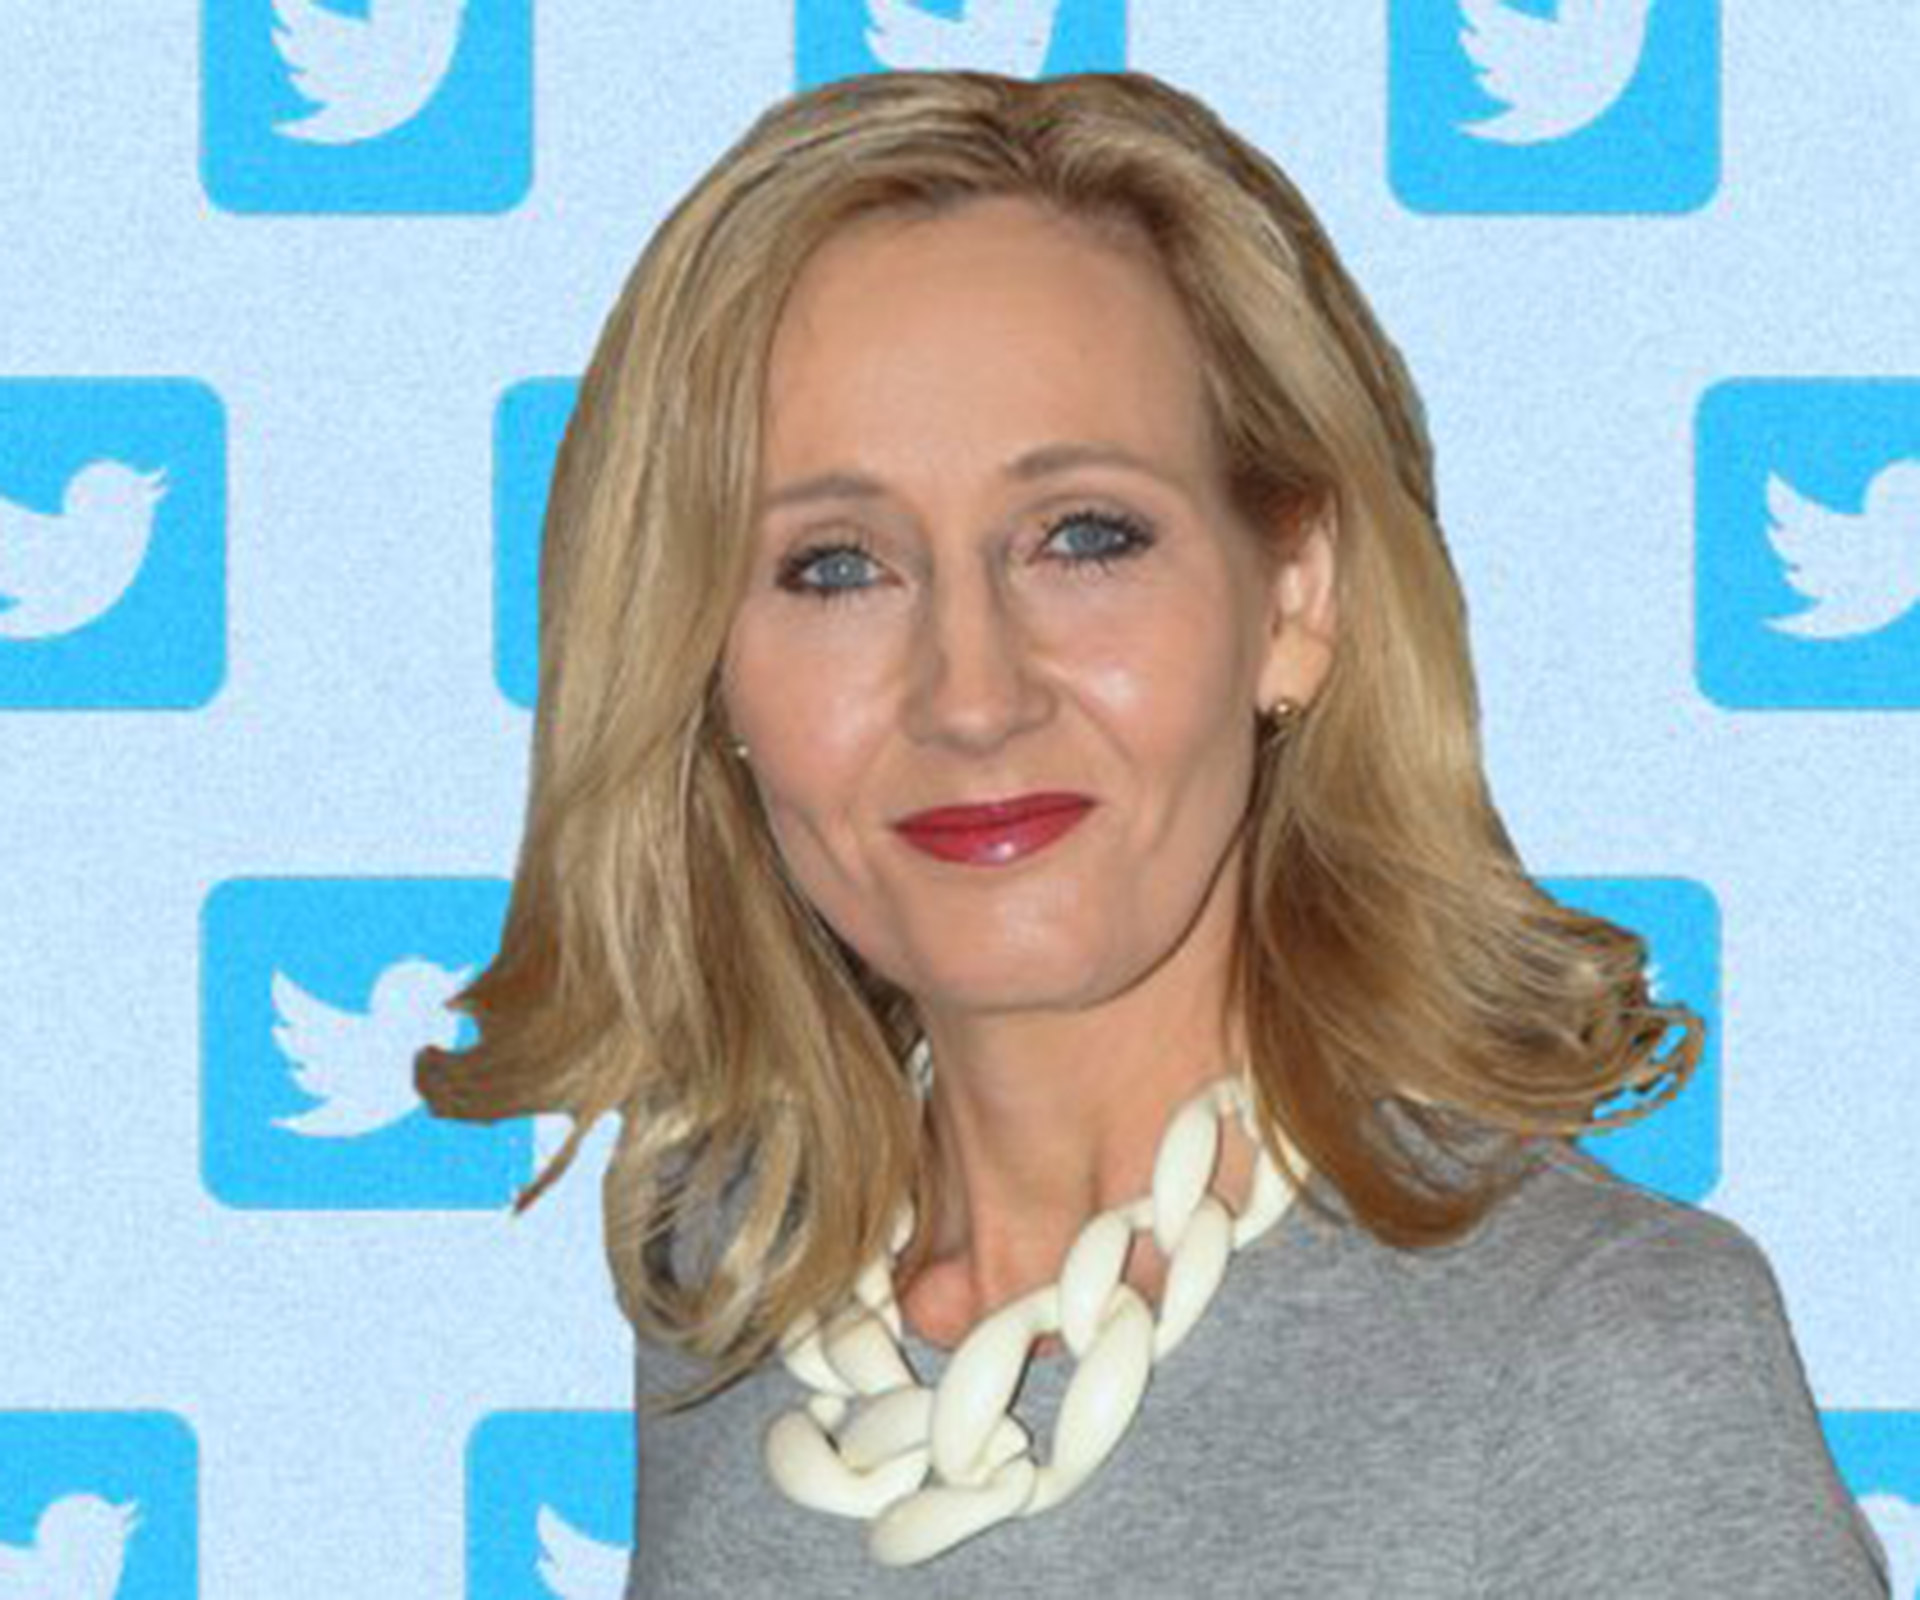 A celebration of J.K. Rowling and her most sassiest Tweets ever